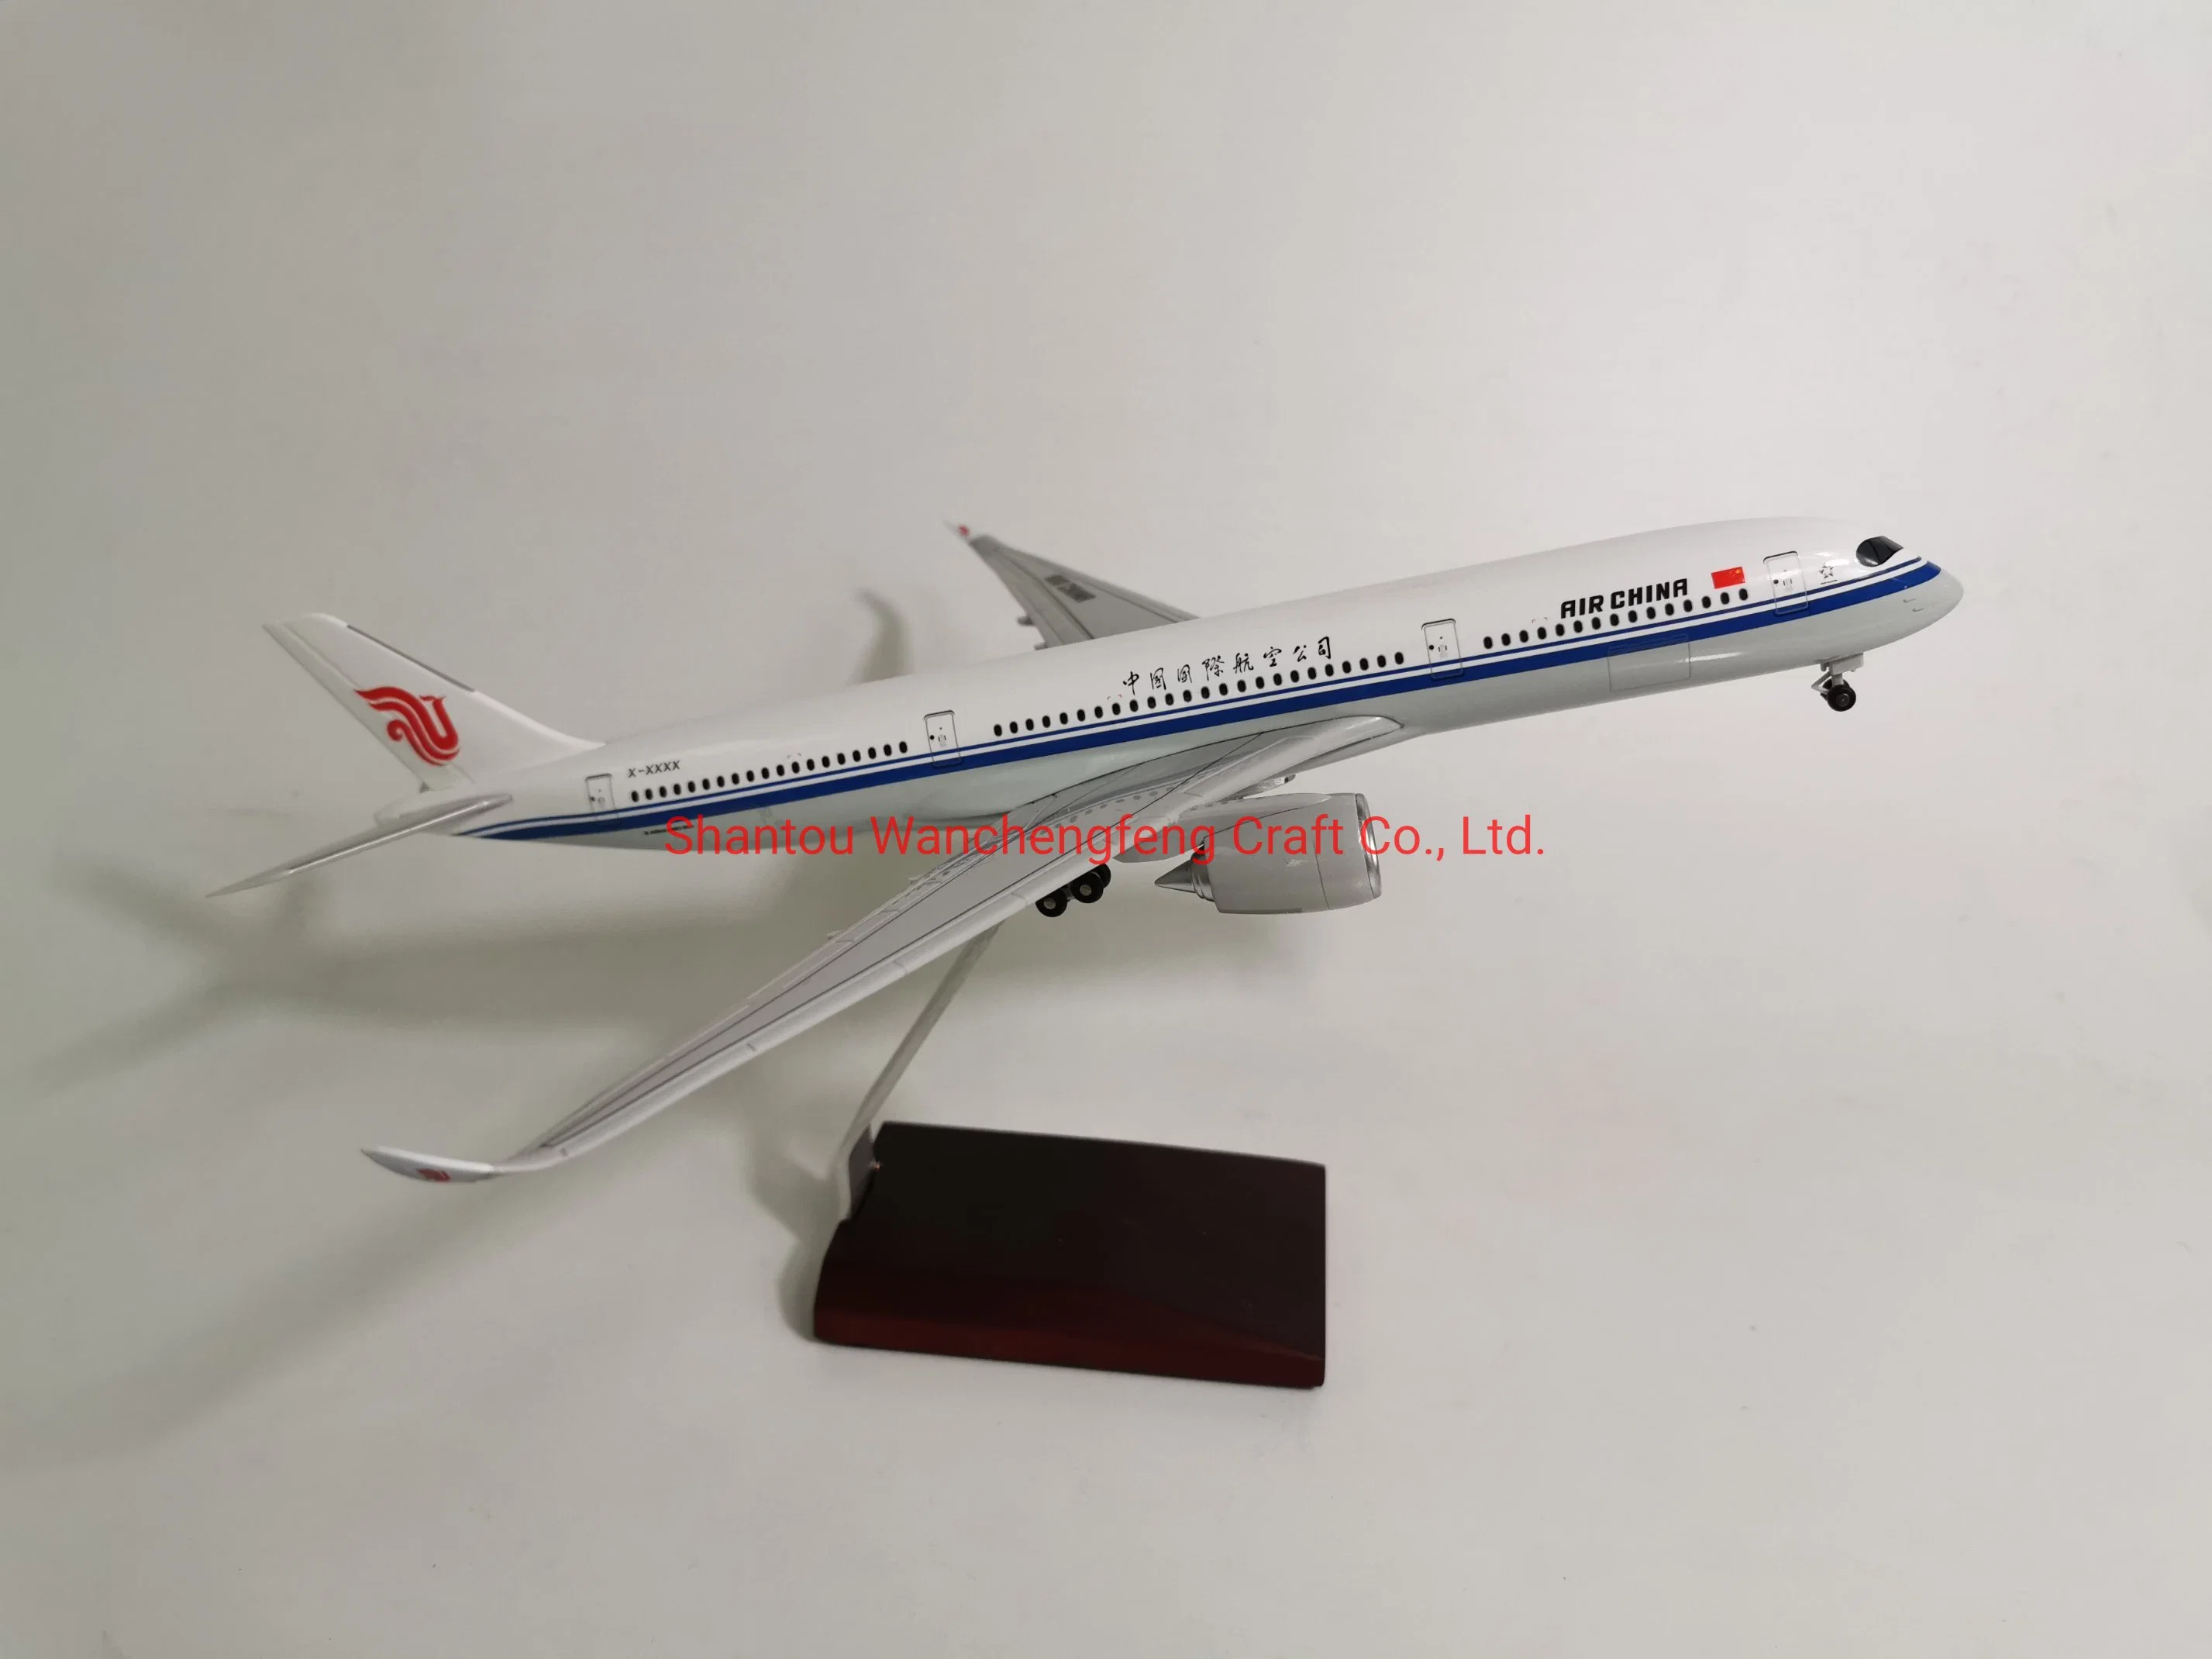 Airbus A350 Scale Plane Model Air China Airline Model